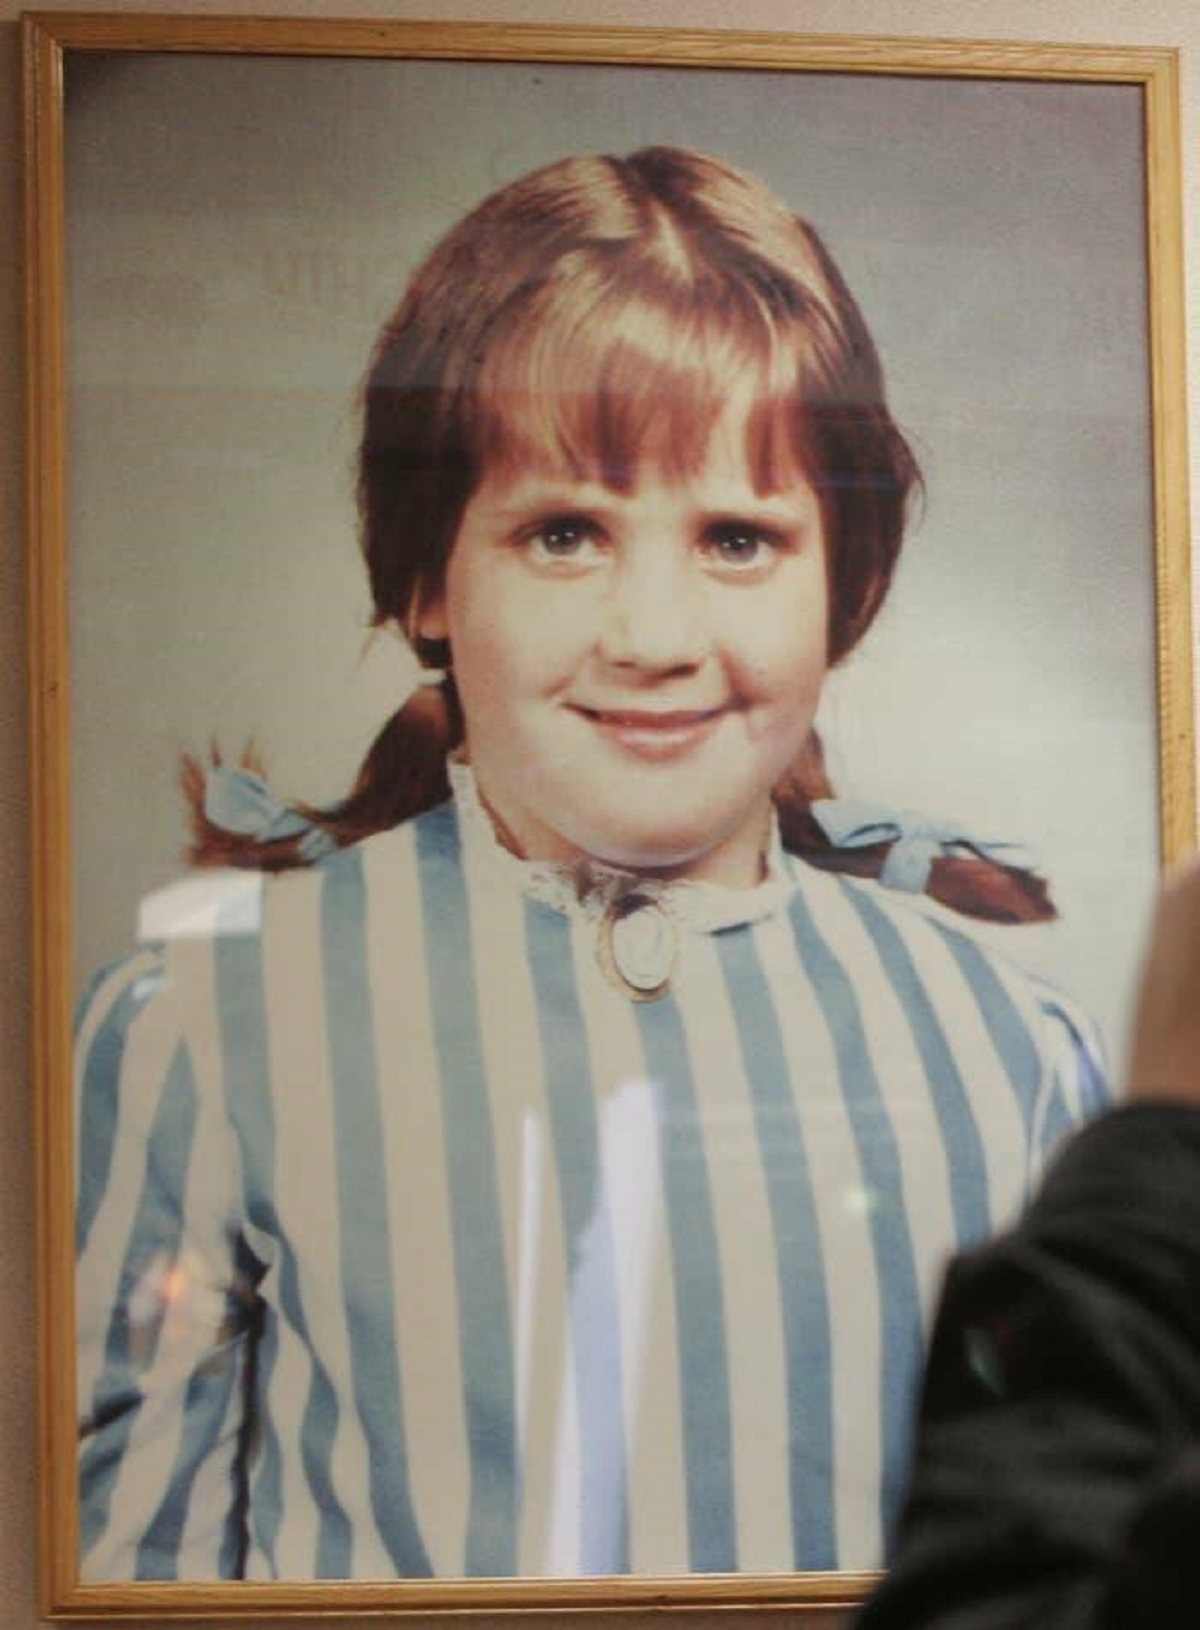 This is Wendy Thomas, the daughter of Wendy's founder Dave Thomas and the namesake of the restaurant: